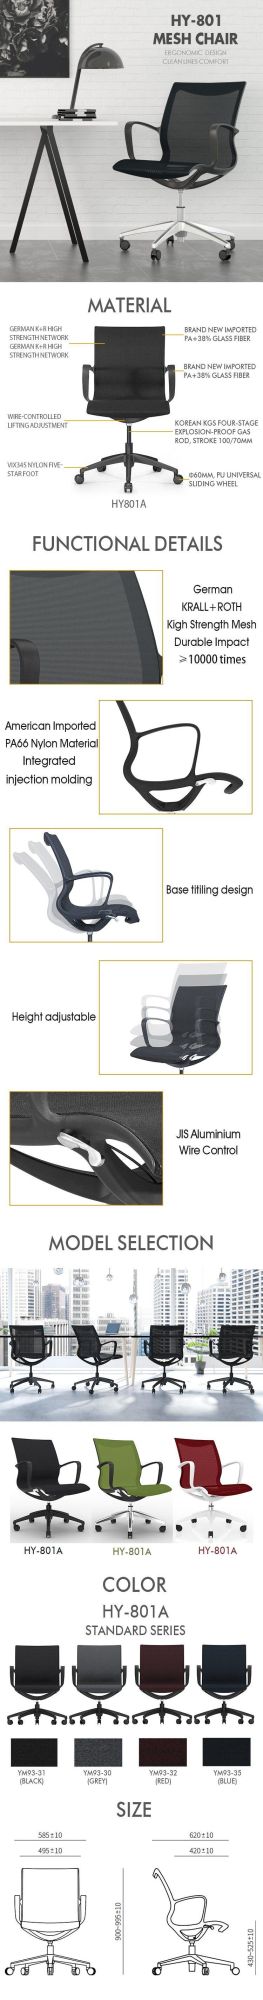 Foshan Furniture Office Executive Chair with PU Castors for Staff